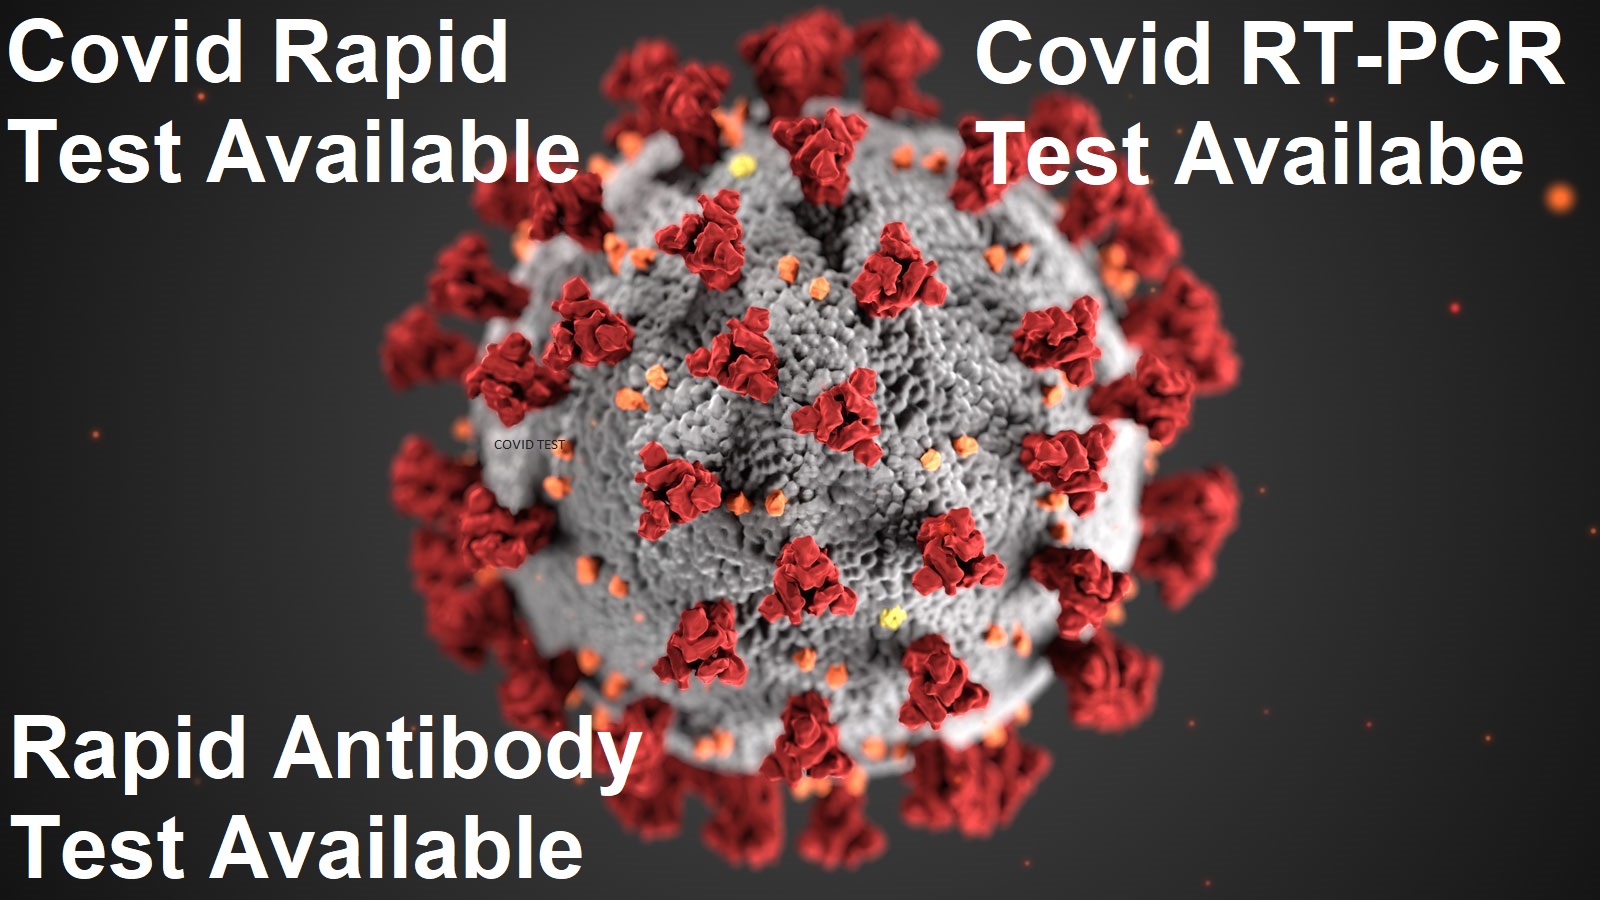 COVID-19 Test Available